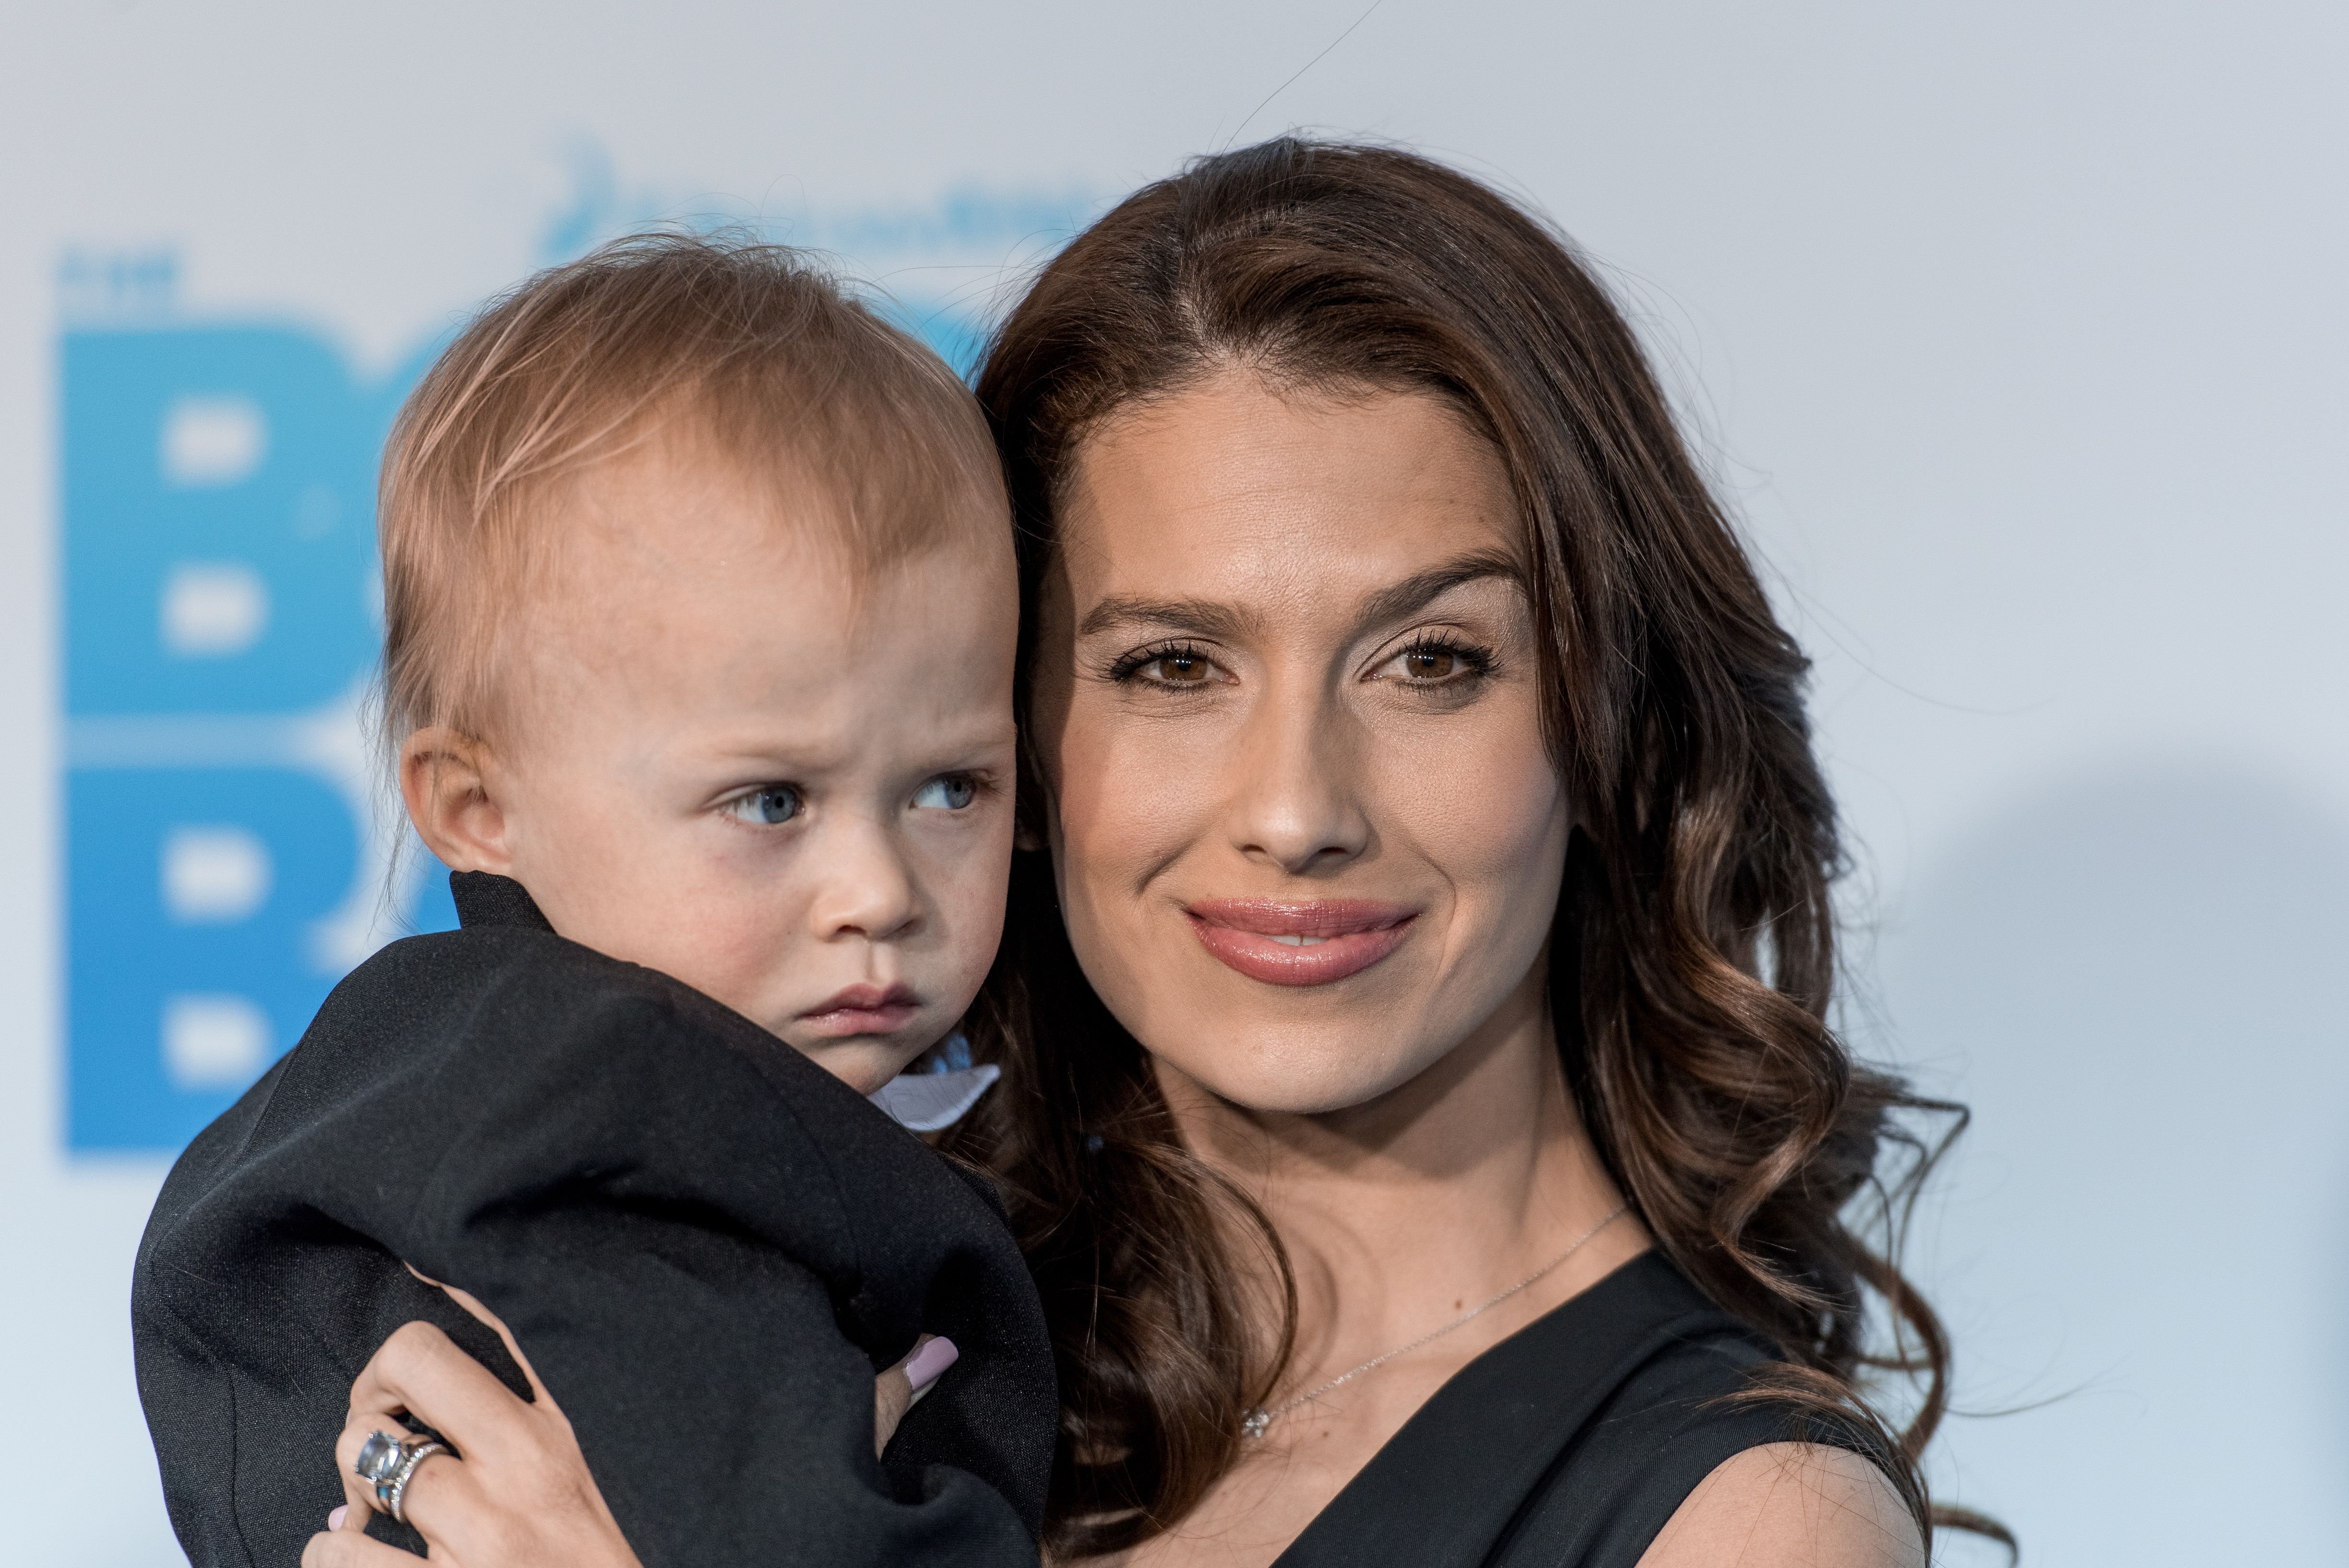 Rafael Thomas Baldwin and Hilaria Baldwin during "The Boss Baby" New York Premiere at AMC Loews Lincoln Square 13 theater on March 20, 2017 in New York City. | Source: Getty Images